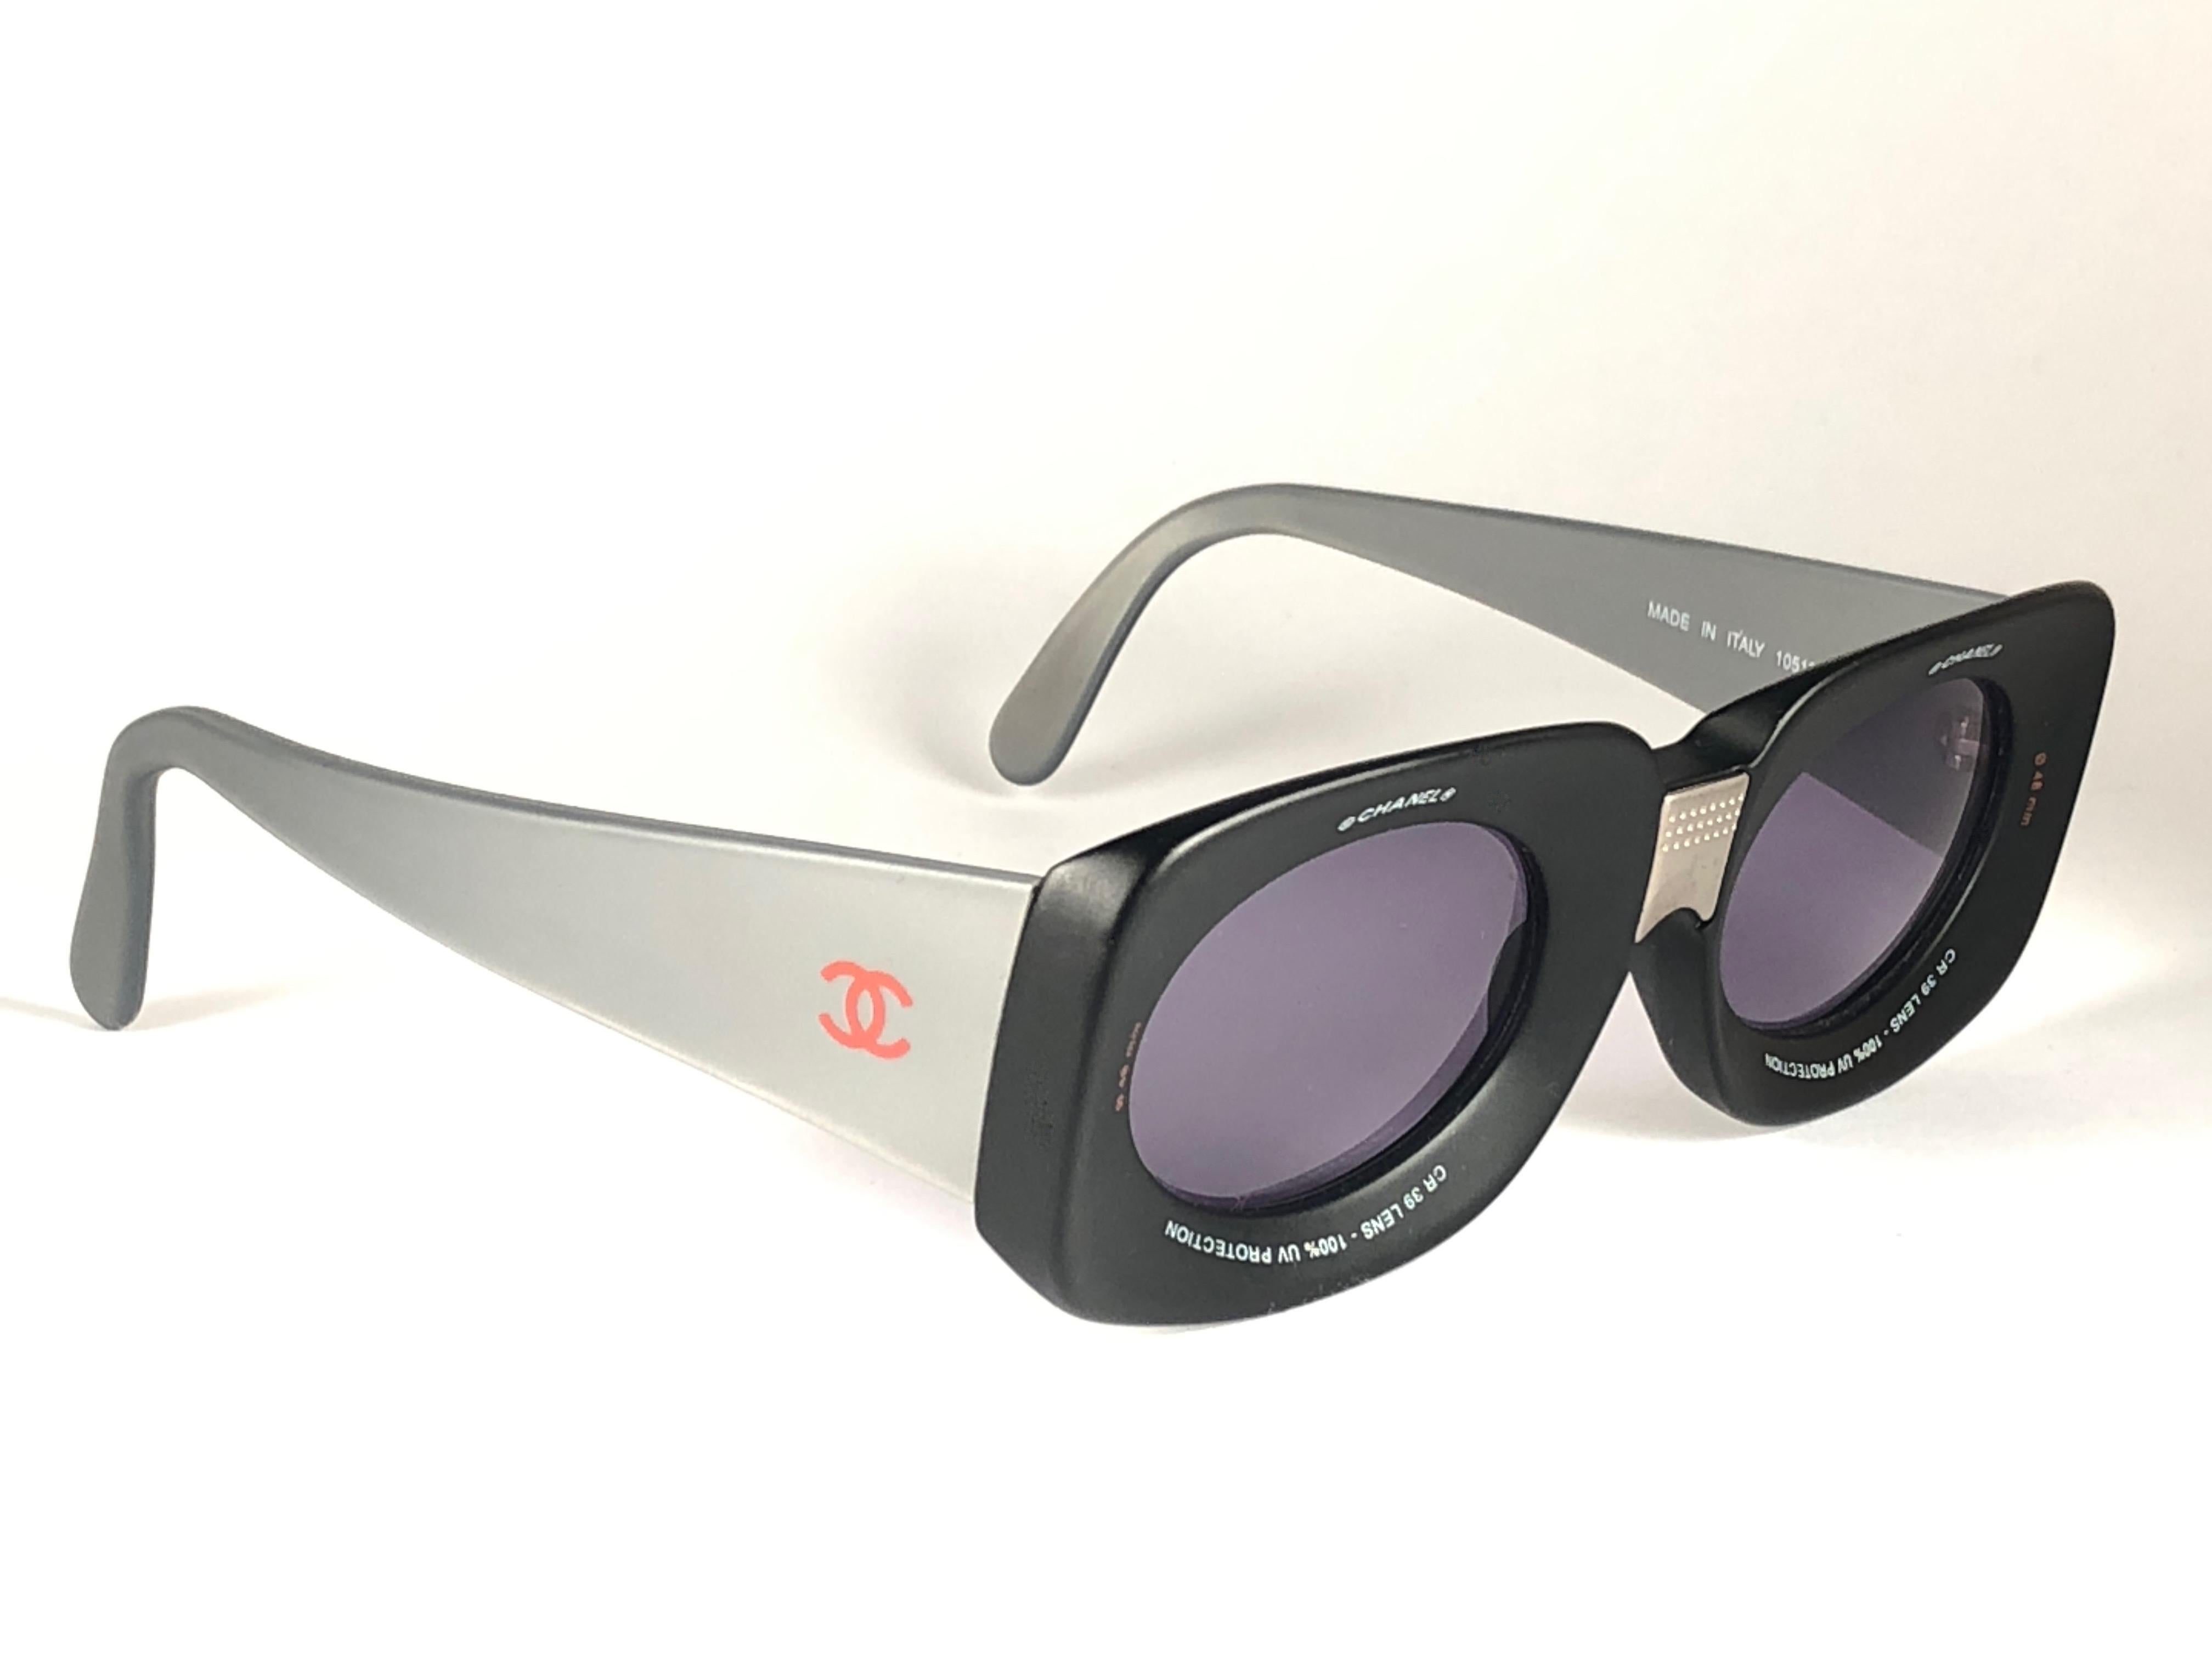 New Rare Chanel sunglasses.

A seldom and unique piece.

This pair of Chanel sunglasses is an absolute showstopper.

This pair may show minor sign of wear due to storage.